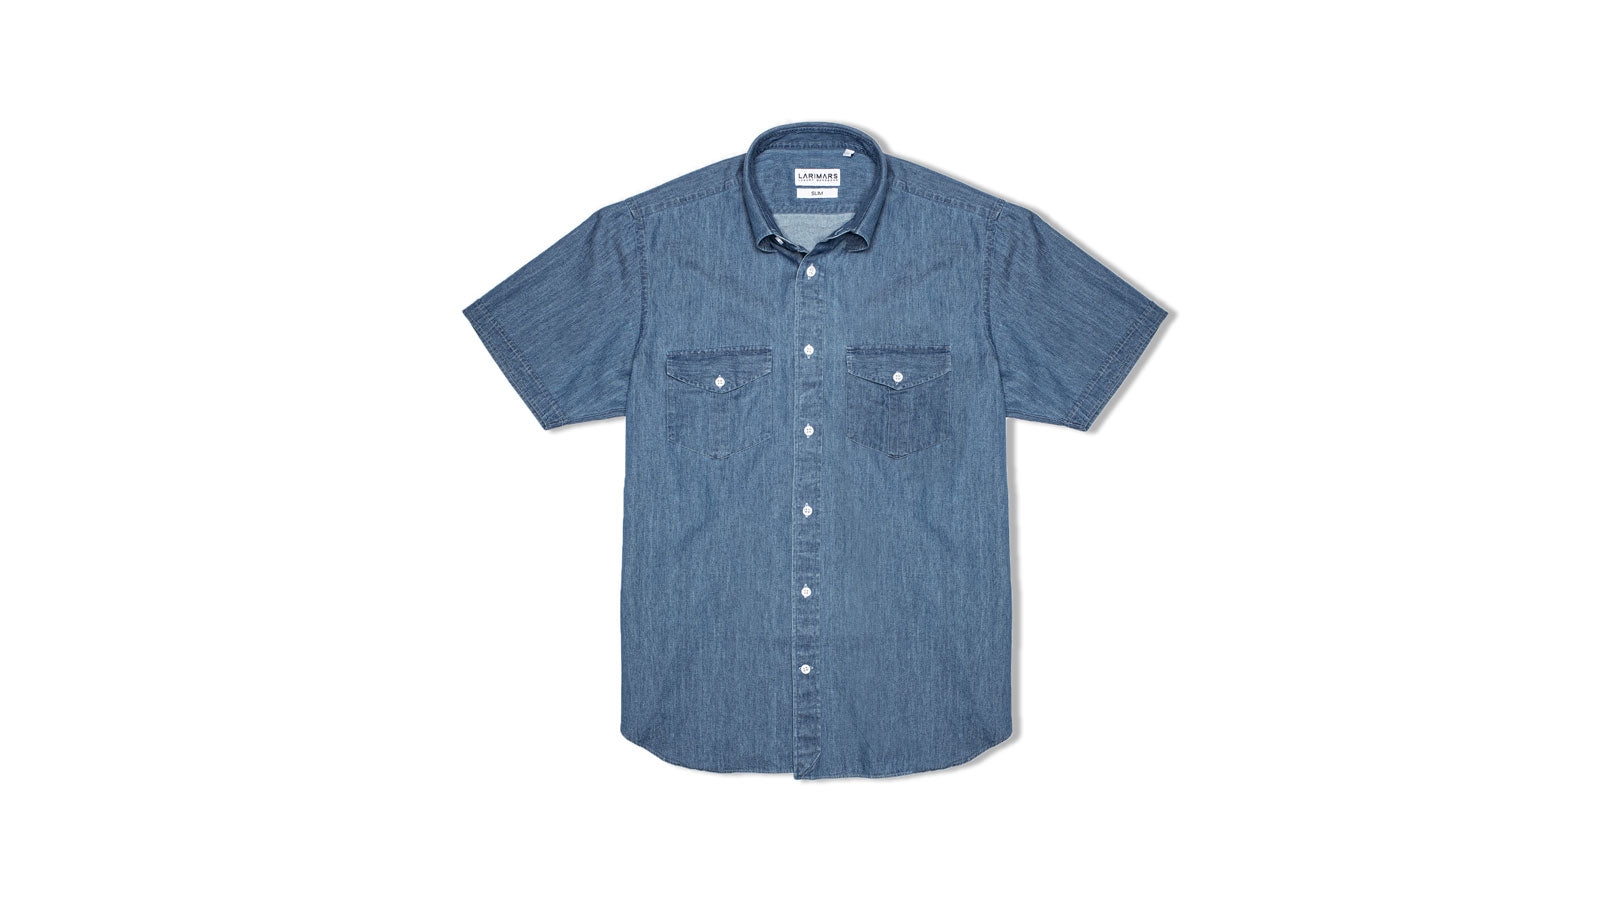 Embrace Summer in Style with Our Indigo Garment Washed Denim Shirt